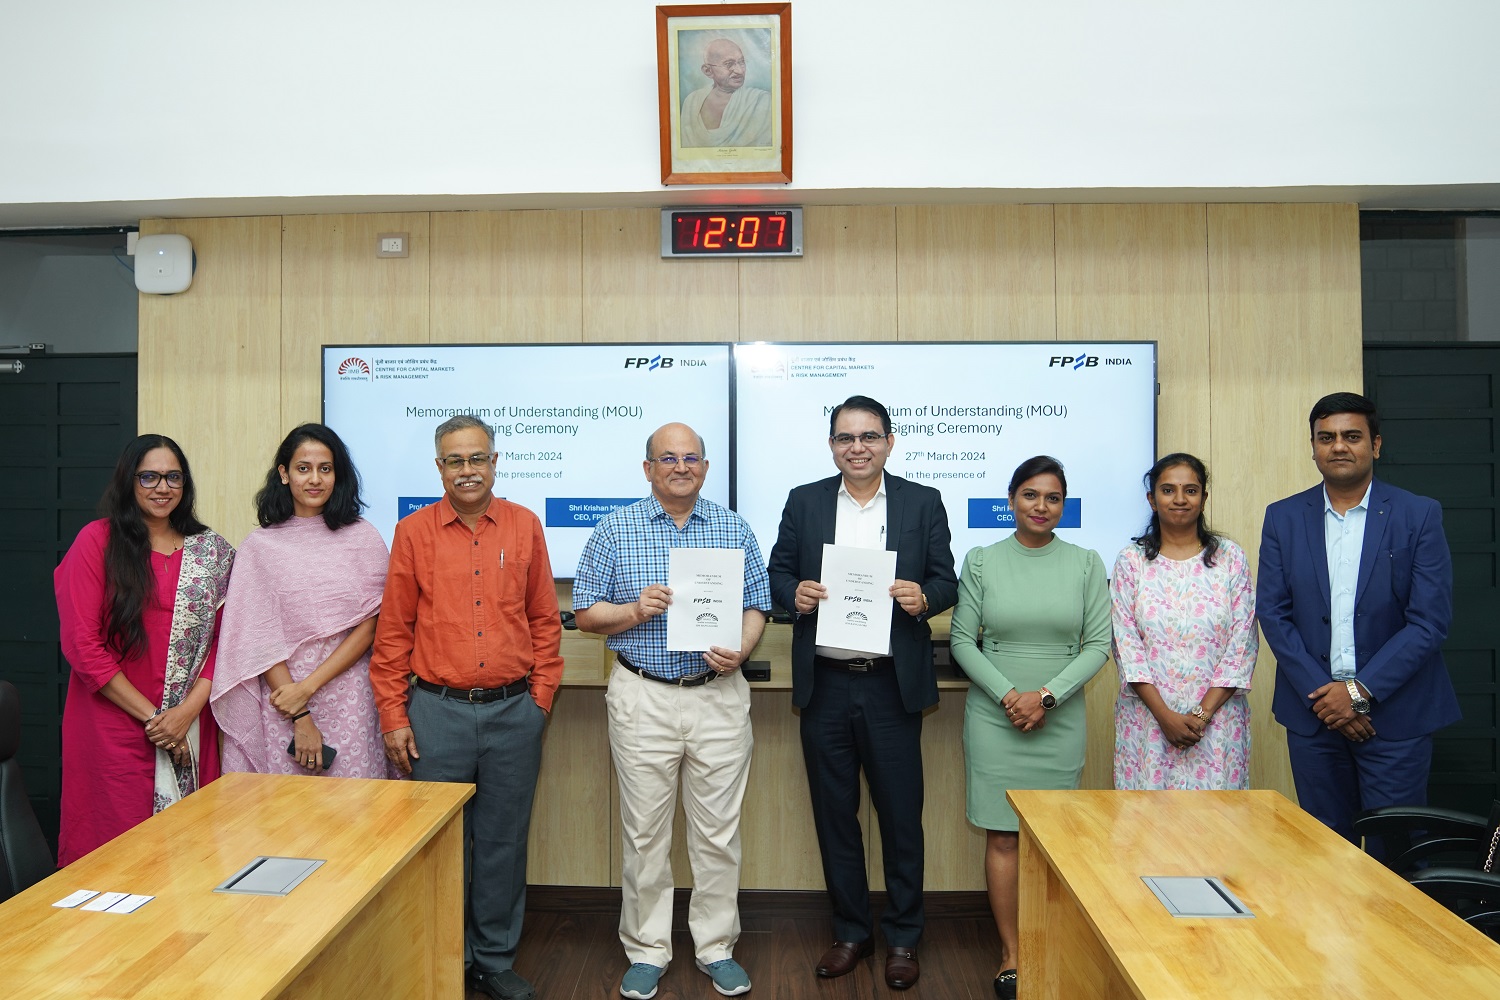 Prof. Rishikesha T Krishnan, Director, IIM Bangalore, exchanges a signed agreement of MoU between IIMB and the Financial Planning Standards Board India with Krishan Mishra, Chief Executive Officer, FPSB India, on 27th March 2024.